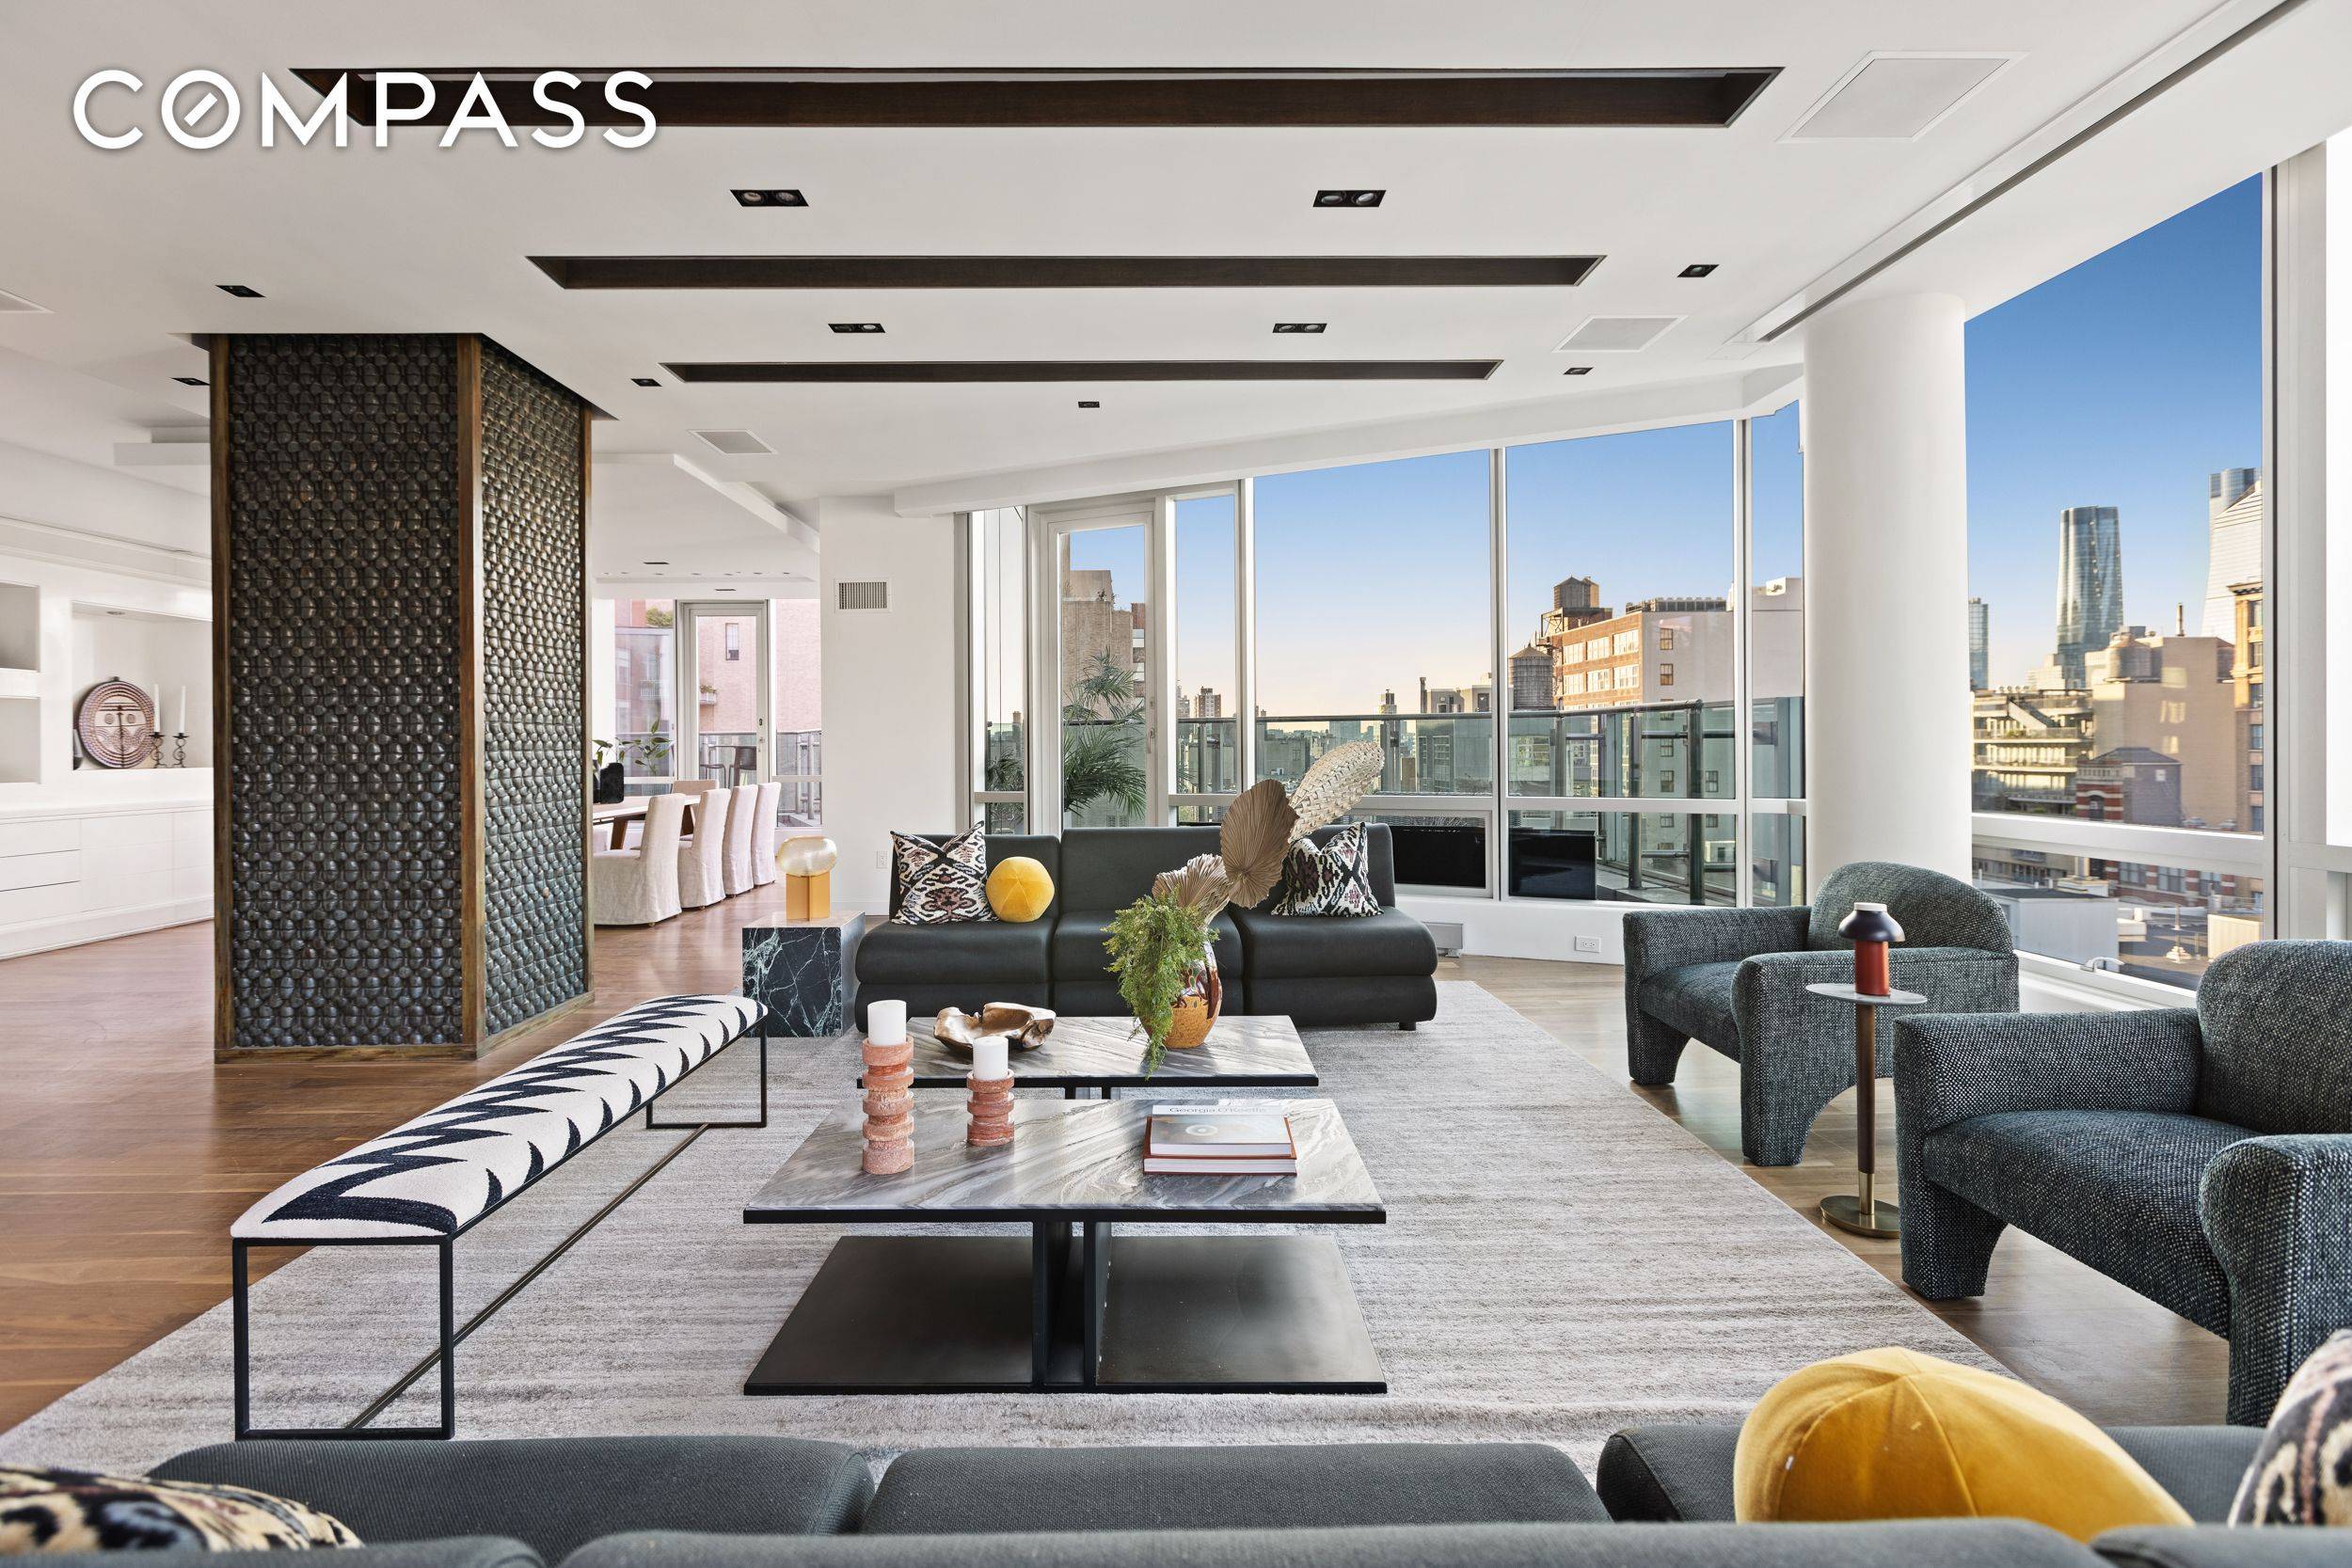 This expansive Penthouse, occupying an entire floor, offers breathtaking panoramic views of the city from every direction, with four remarkable terraces providing private outdoor sanctuaries.